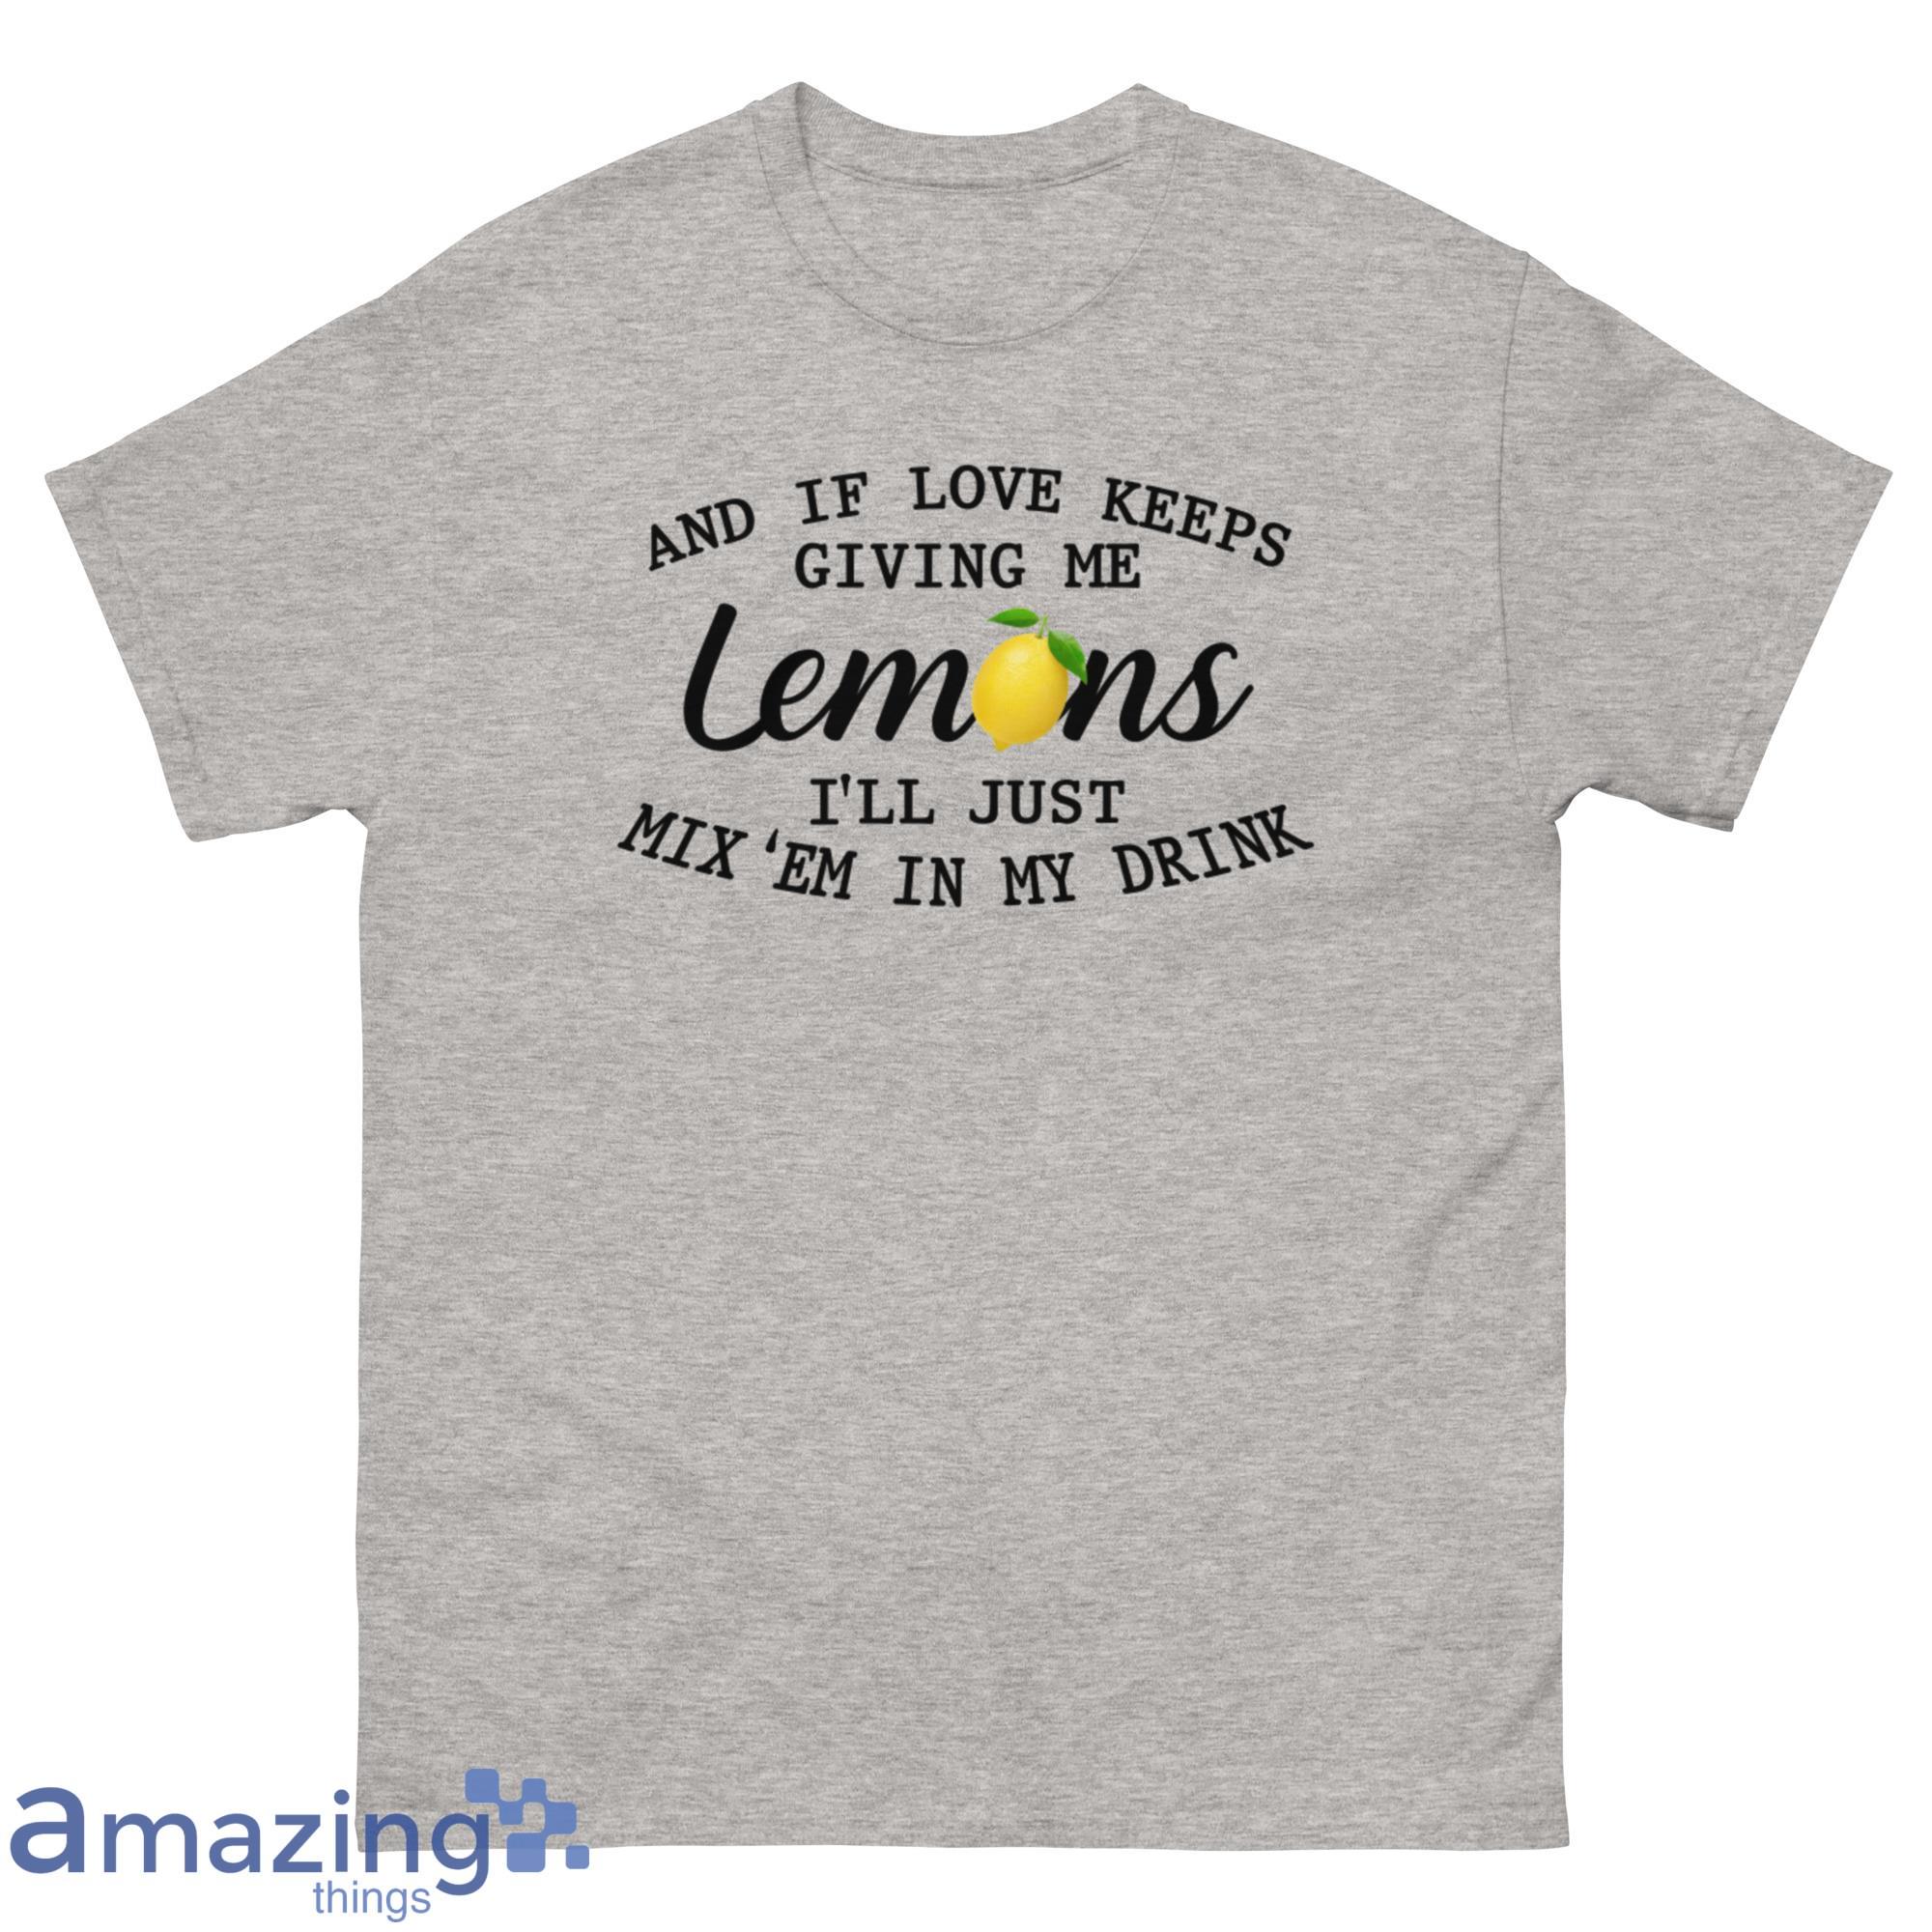 And If Love Keeps Giving Me Lemons Ill Just Mixem In My Drink Shirt - G500 Men’s Classic T-Shirt